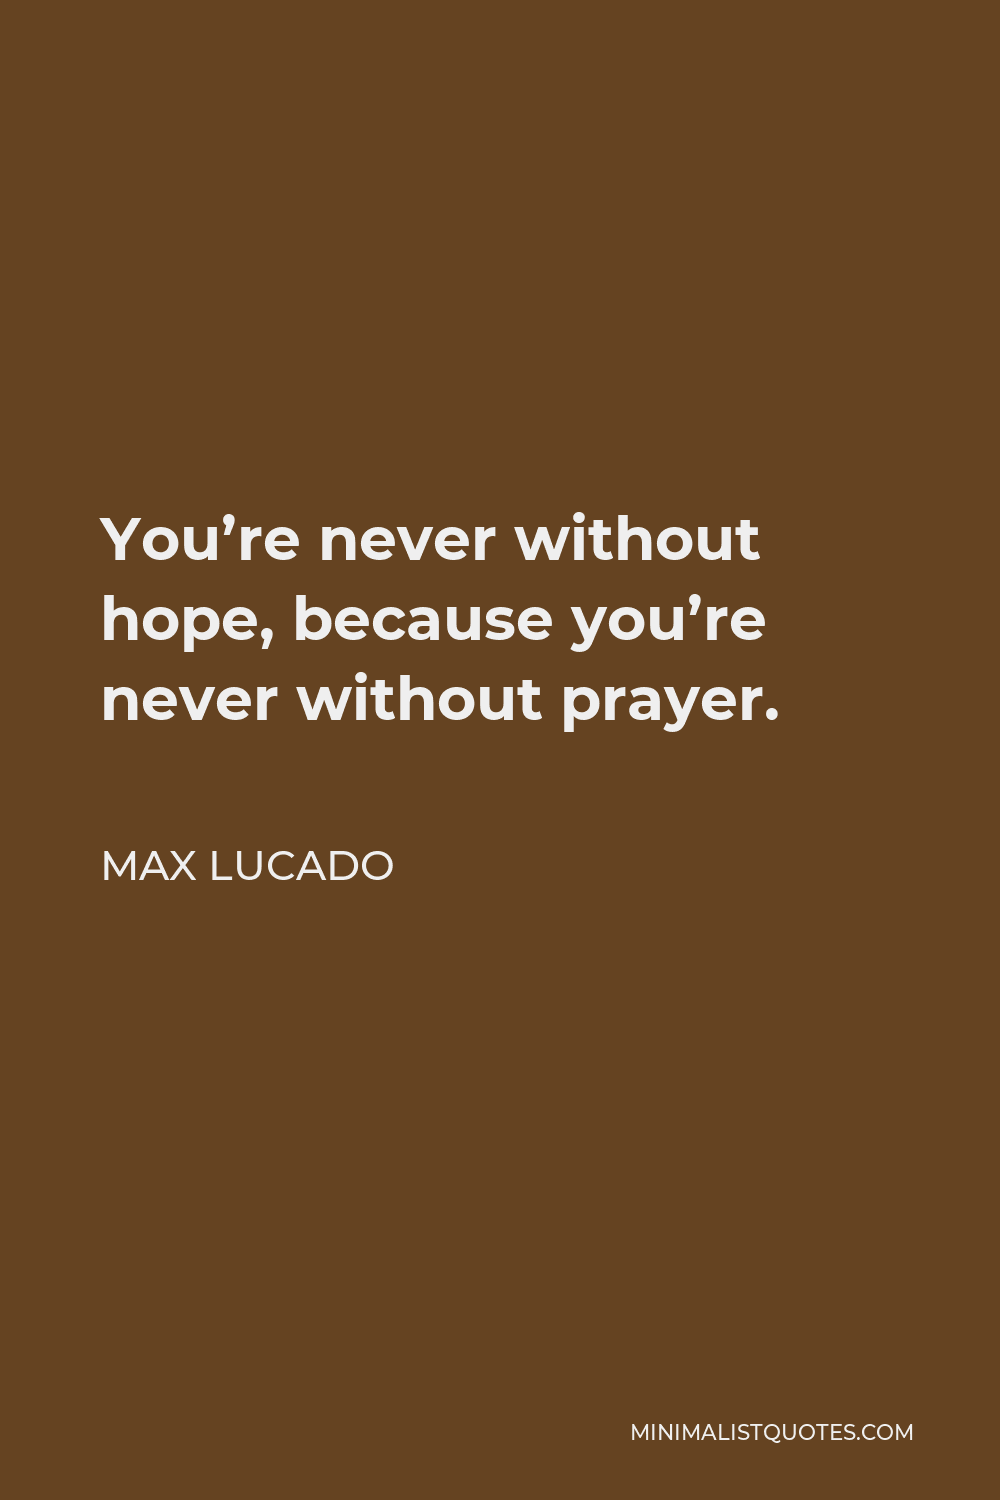 Max Lucado Quote - You’re never without hope, because you’re never without prayer.